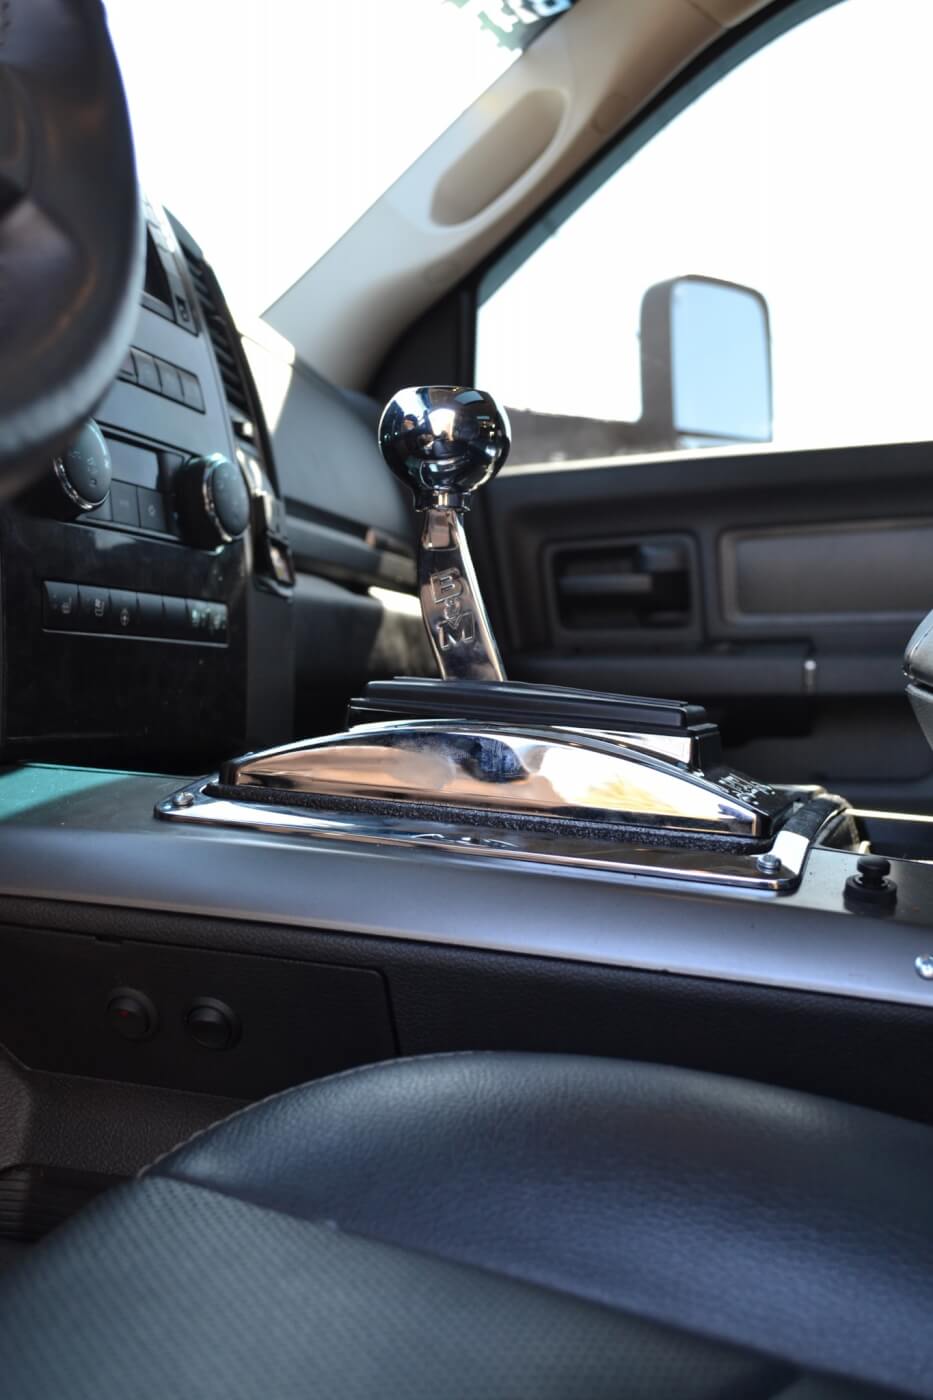 4. The factory shifter can be retained on Dodge and other applications; or a custom shifter arrangement like this floor shifter can be incorporated.